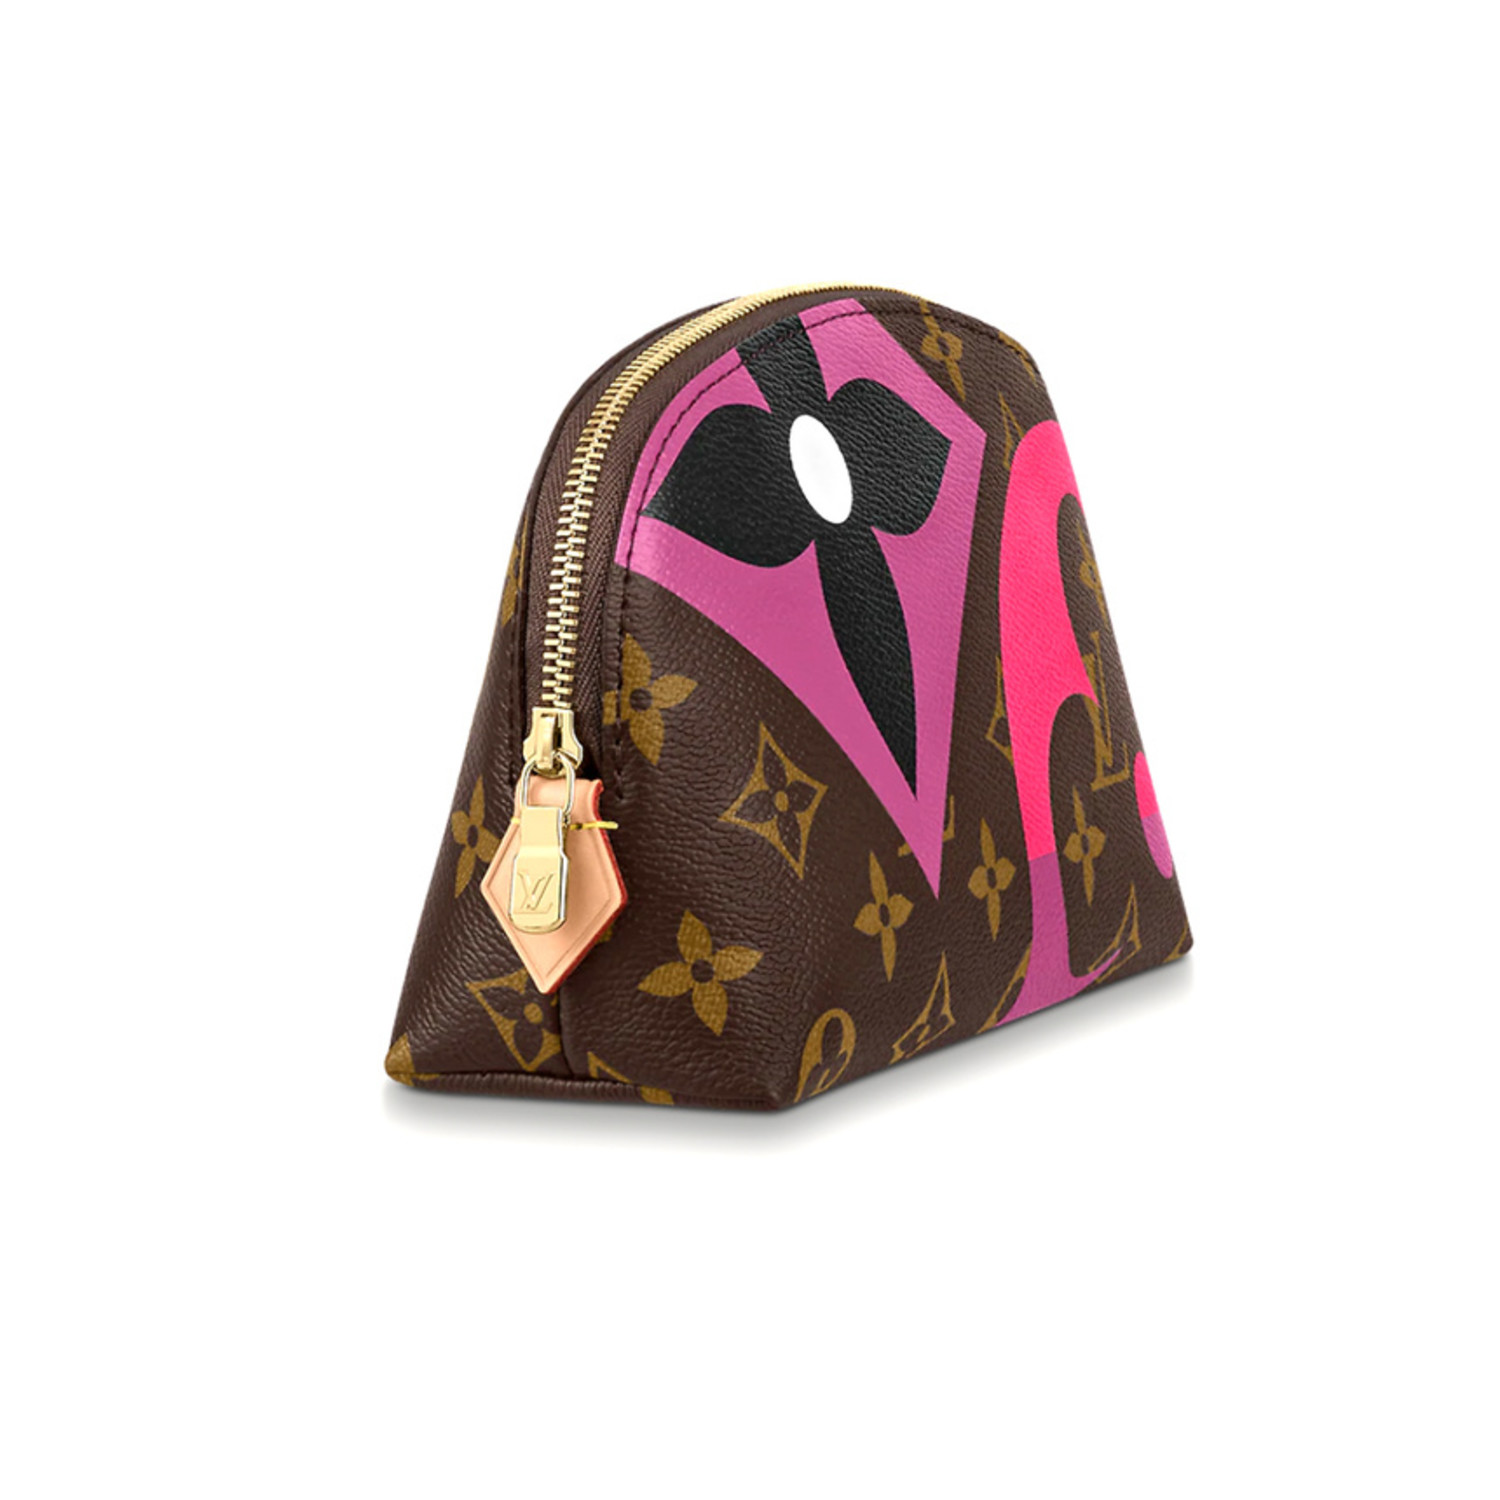 Louis Vuitton Game On Monogram Heart Cosmetic Pouch Make Up Case